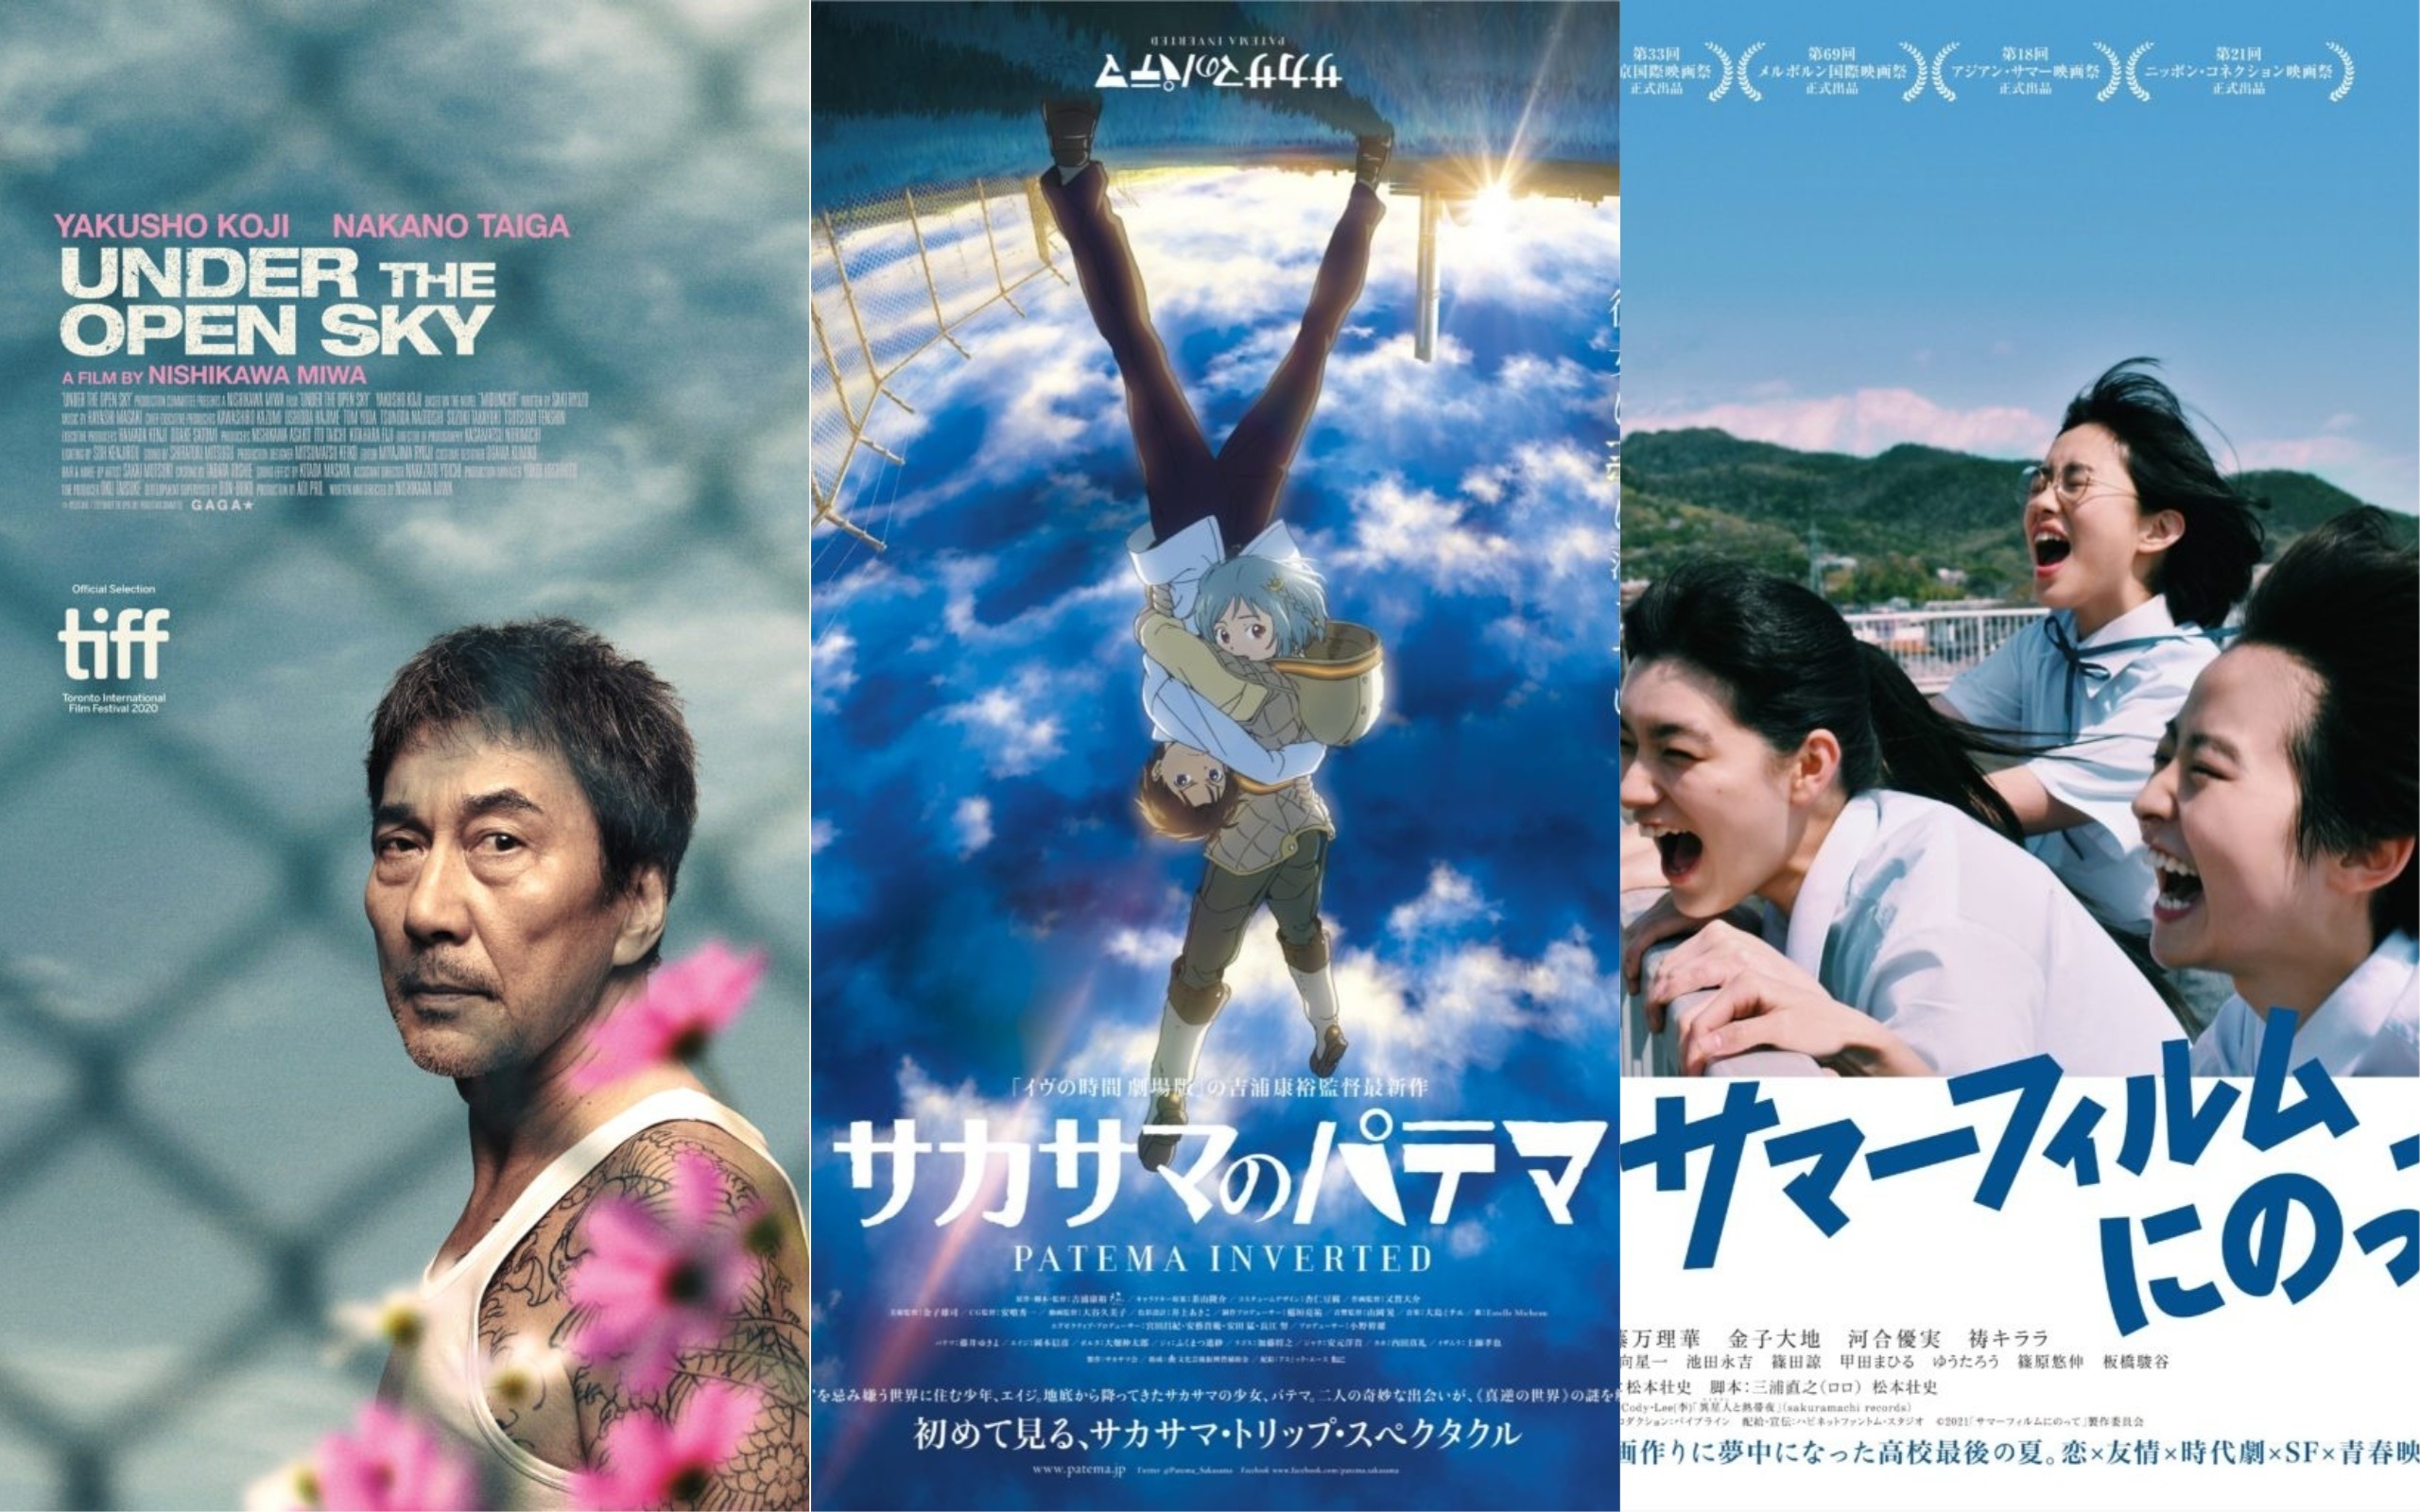 doug ramshaw recommends free japanese movies online pic